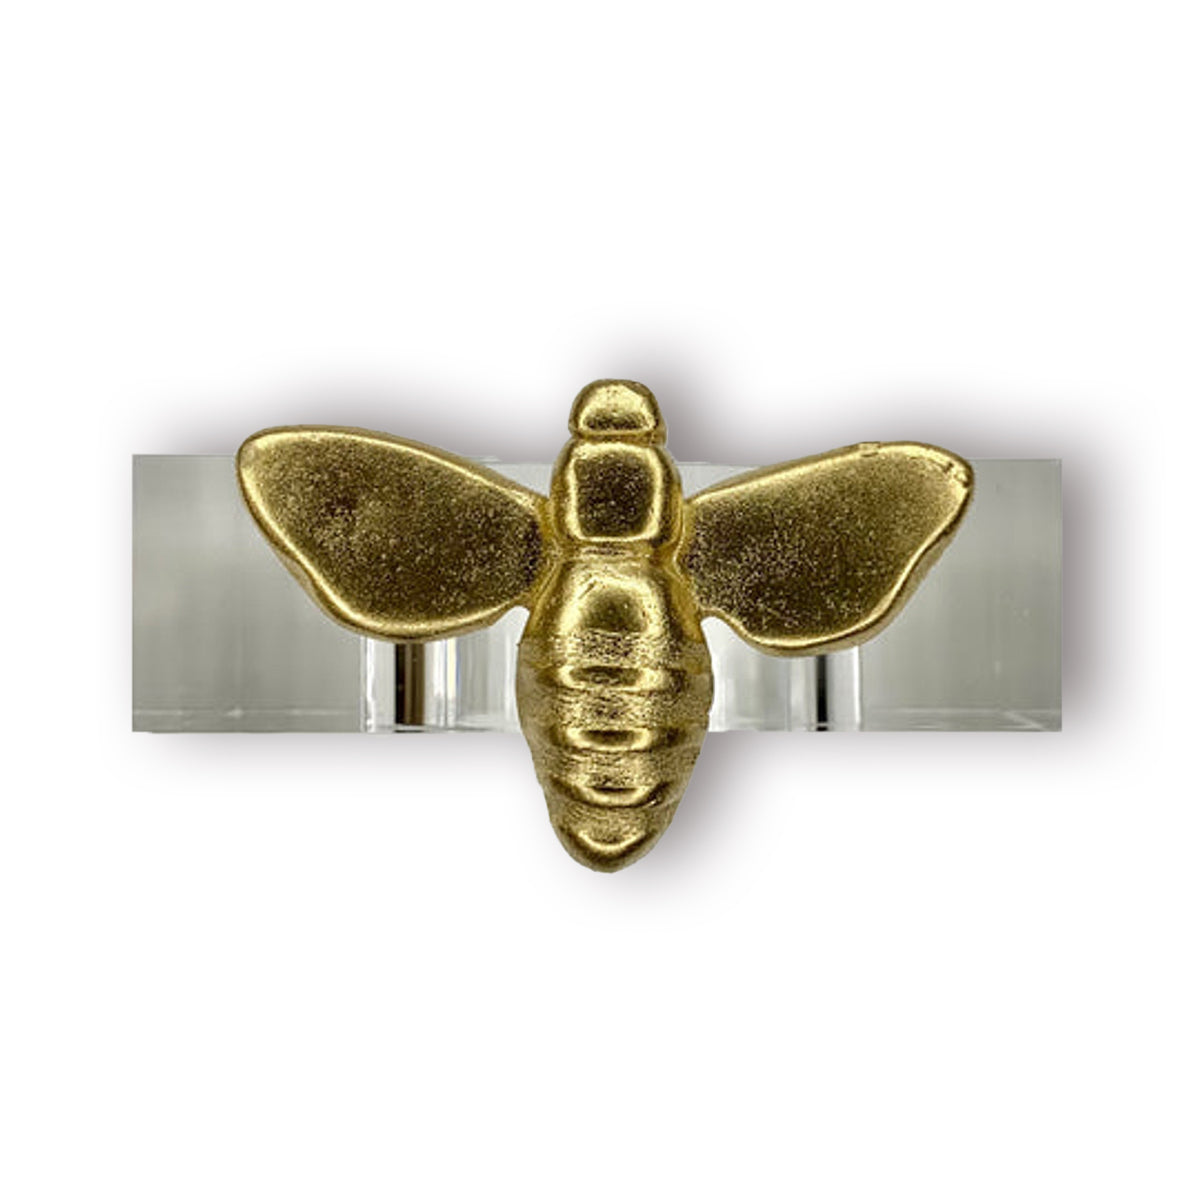 Southern Tribute Bee Acrylic Napkin Ring Set of 4